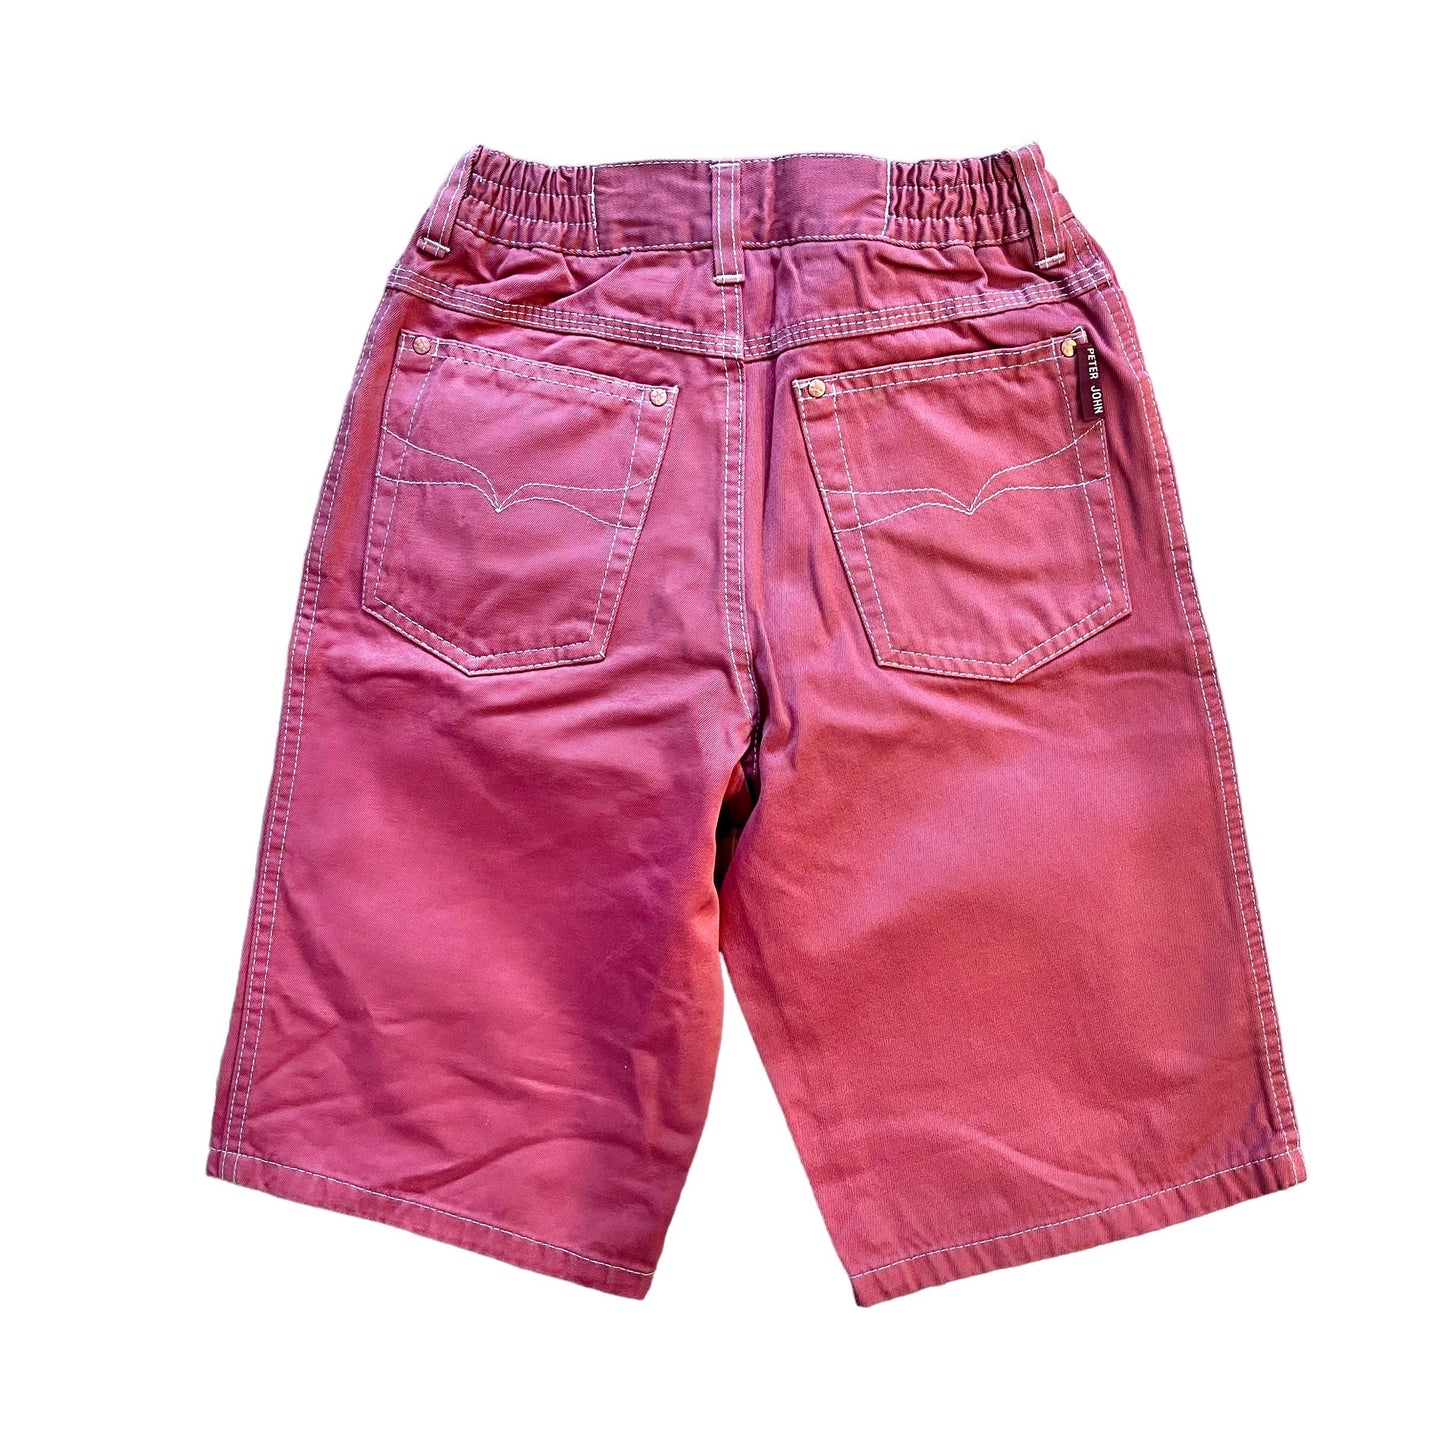 1980s Brownish Red Shorts / 8-10Y